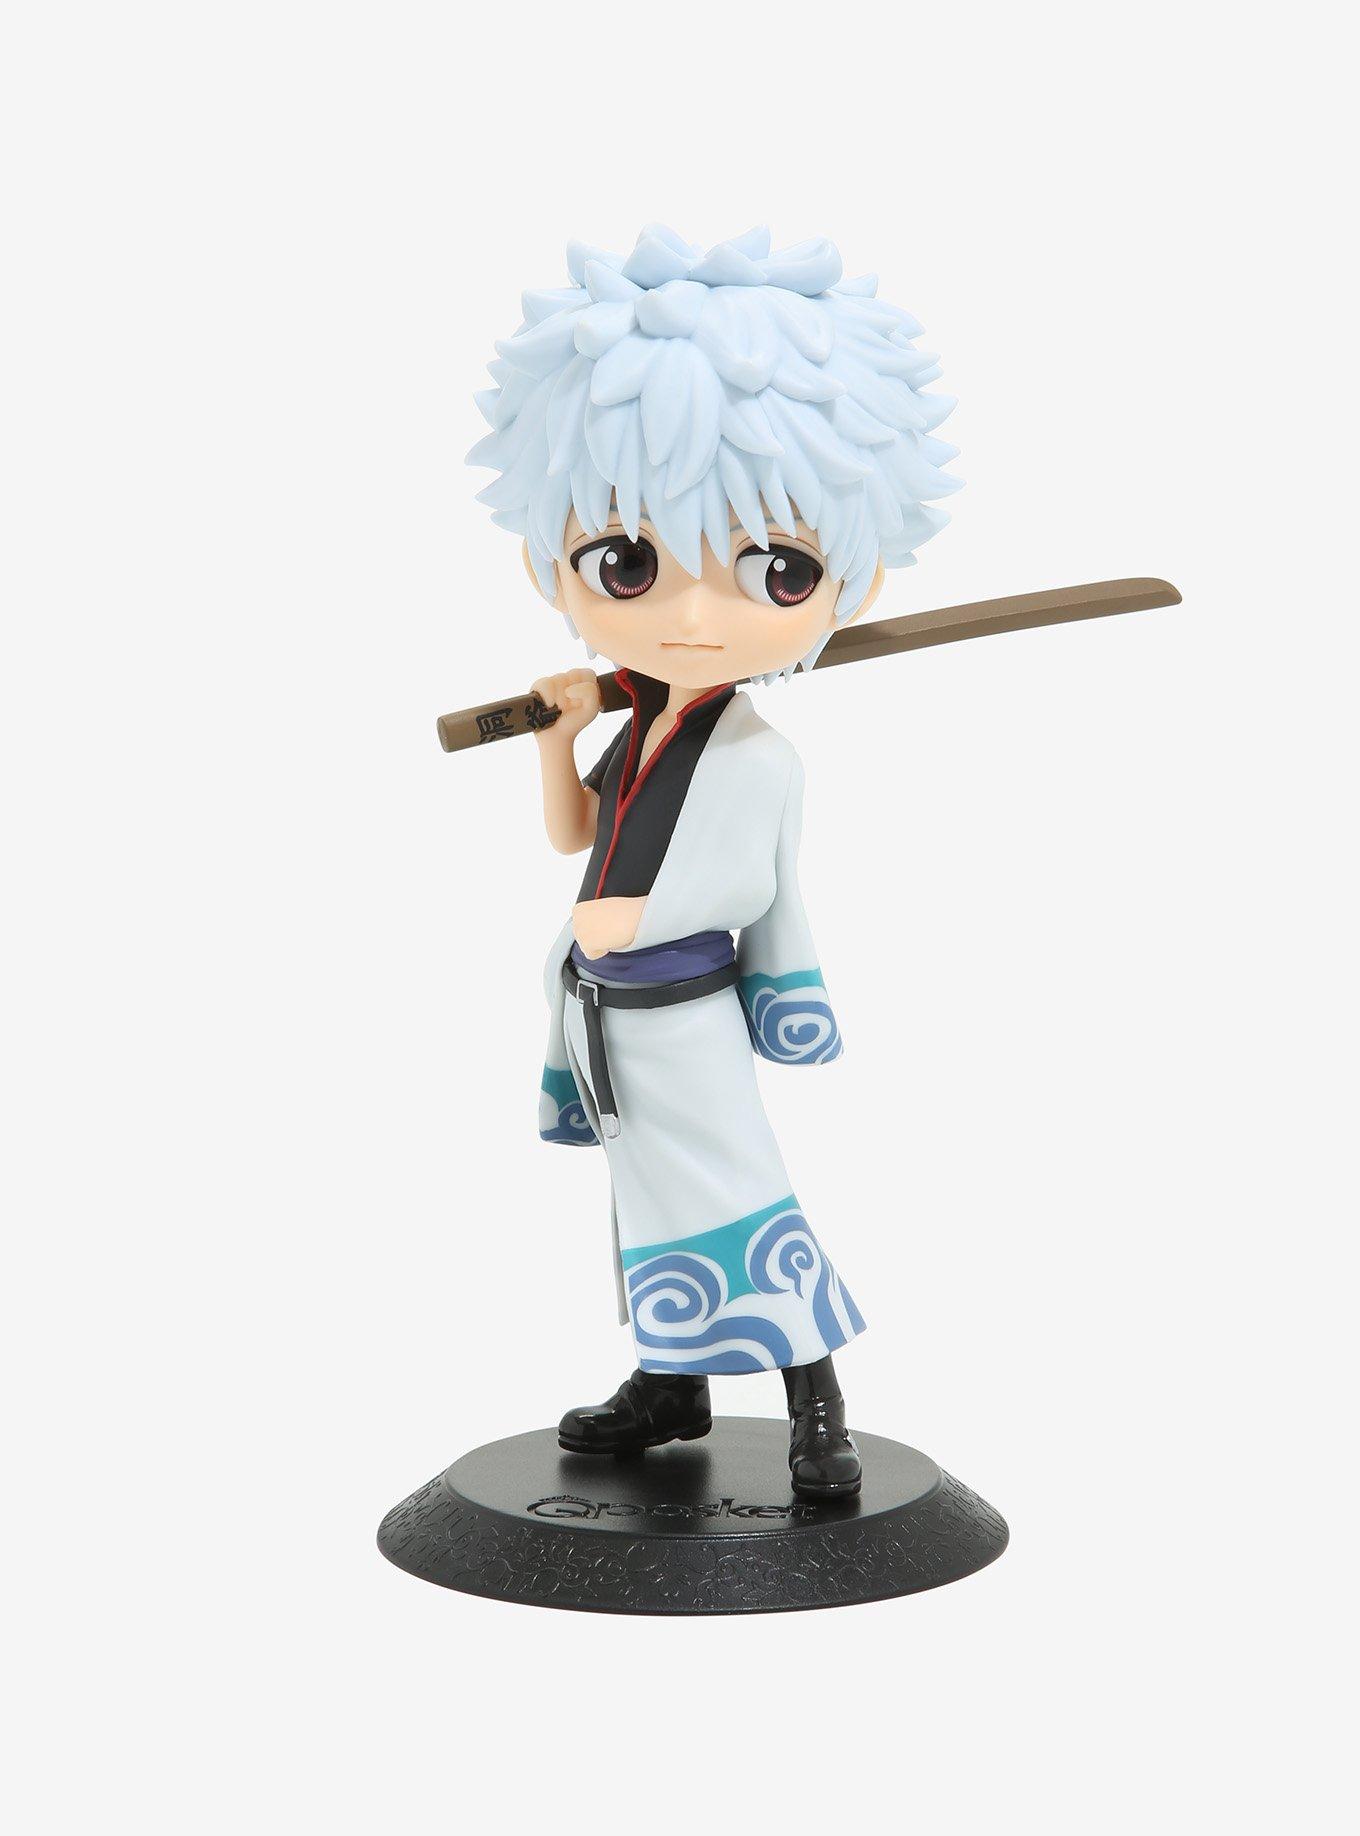 Chibi Reviews on X: So let me get this straight Gintama Anime